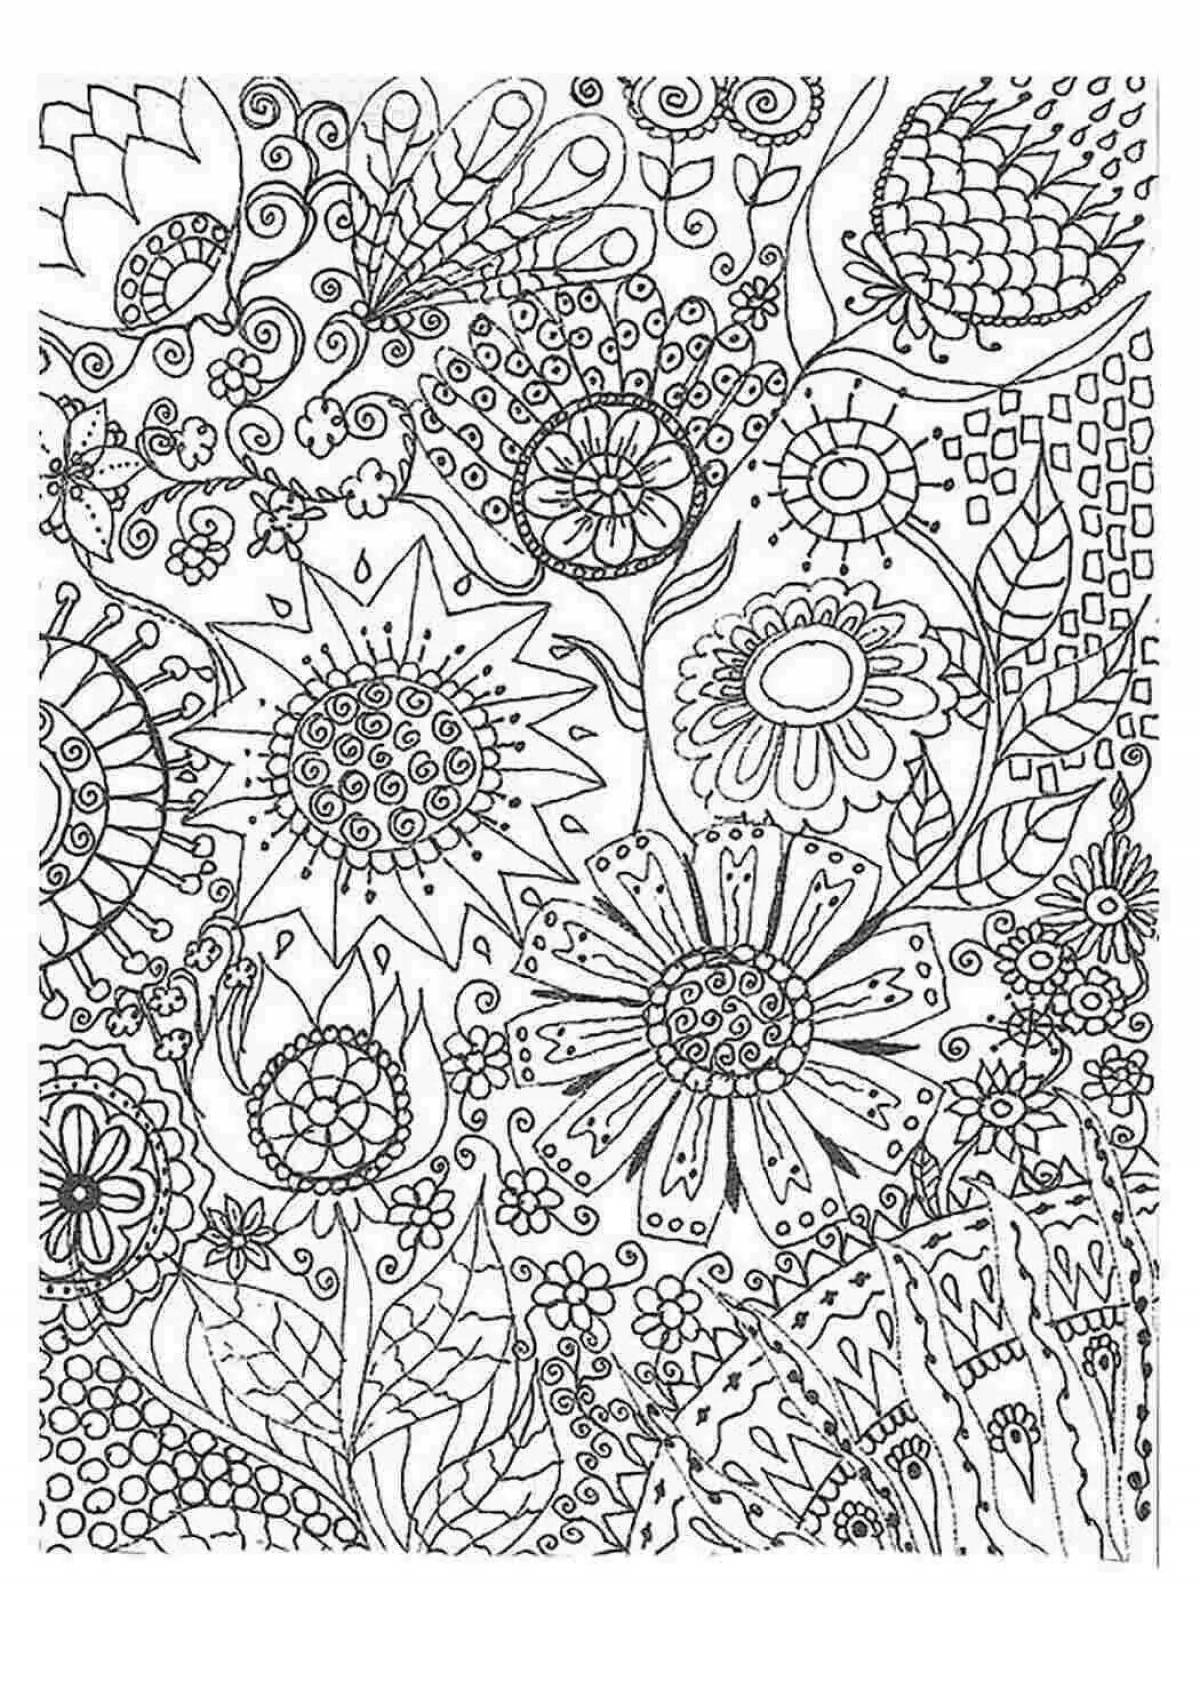 Charming coloring small patterns